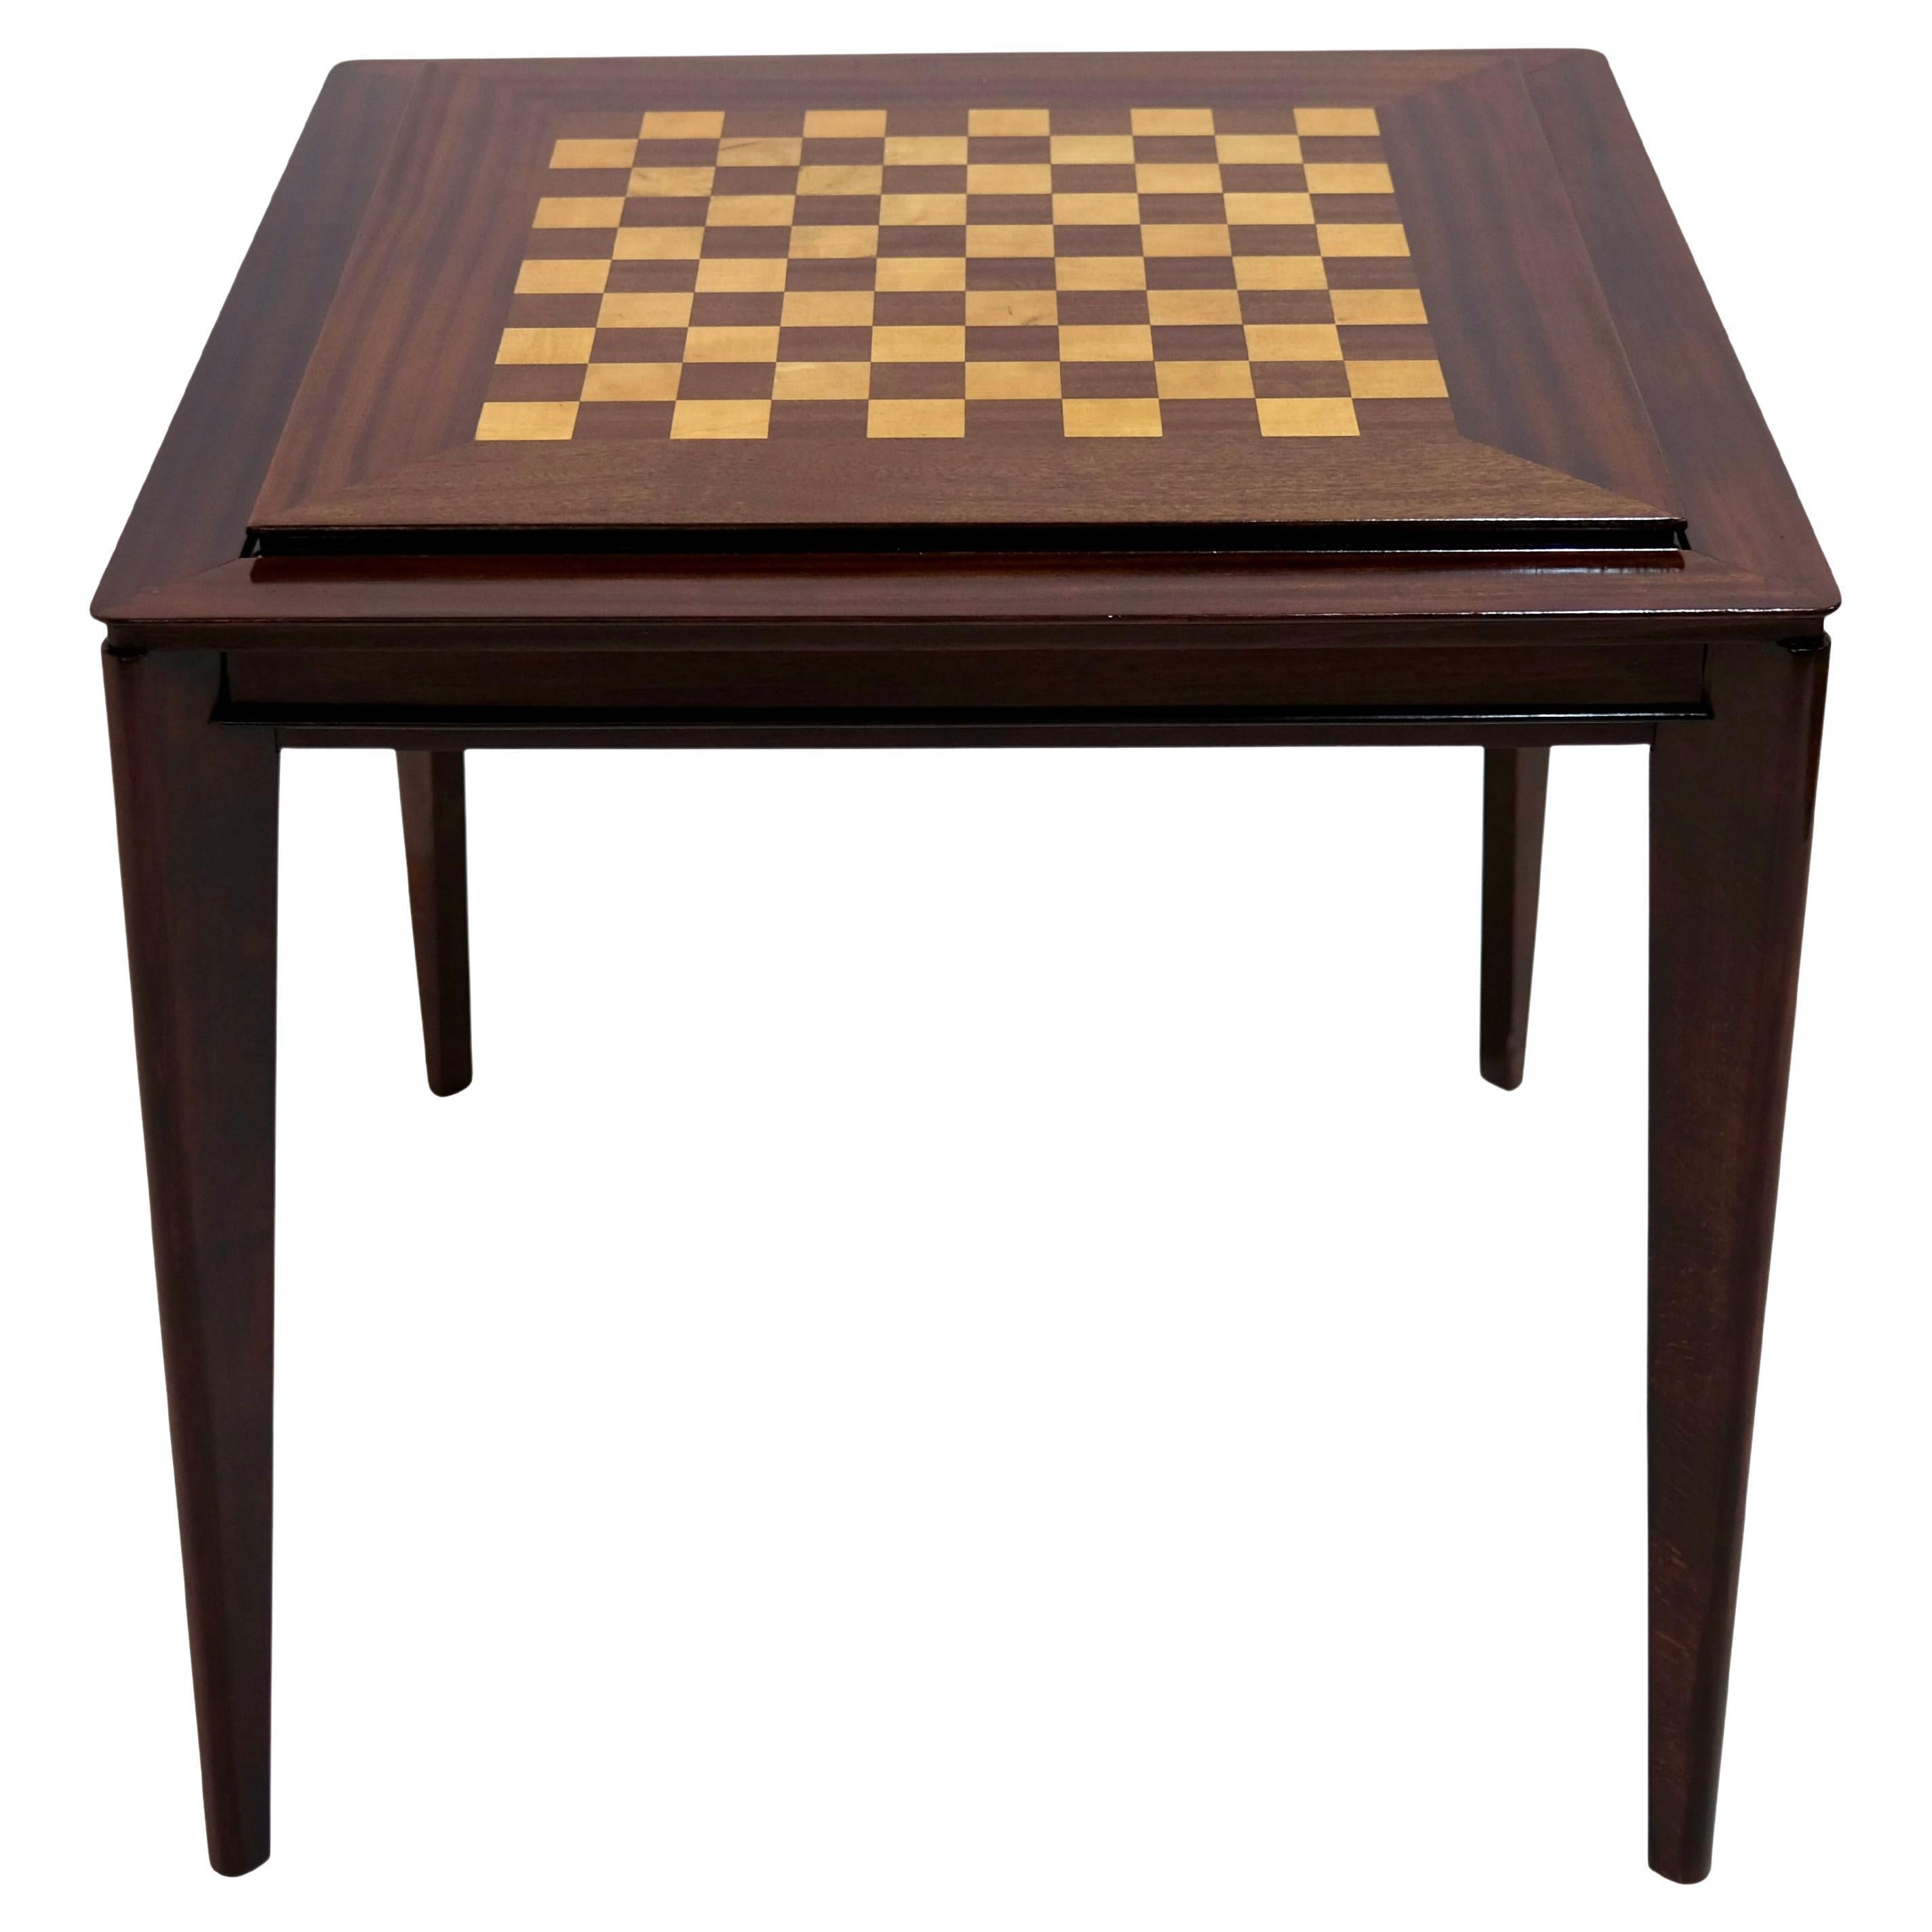 Shellac Hand Polished Art Deco Game Table with Chess Board and Green Felt